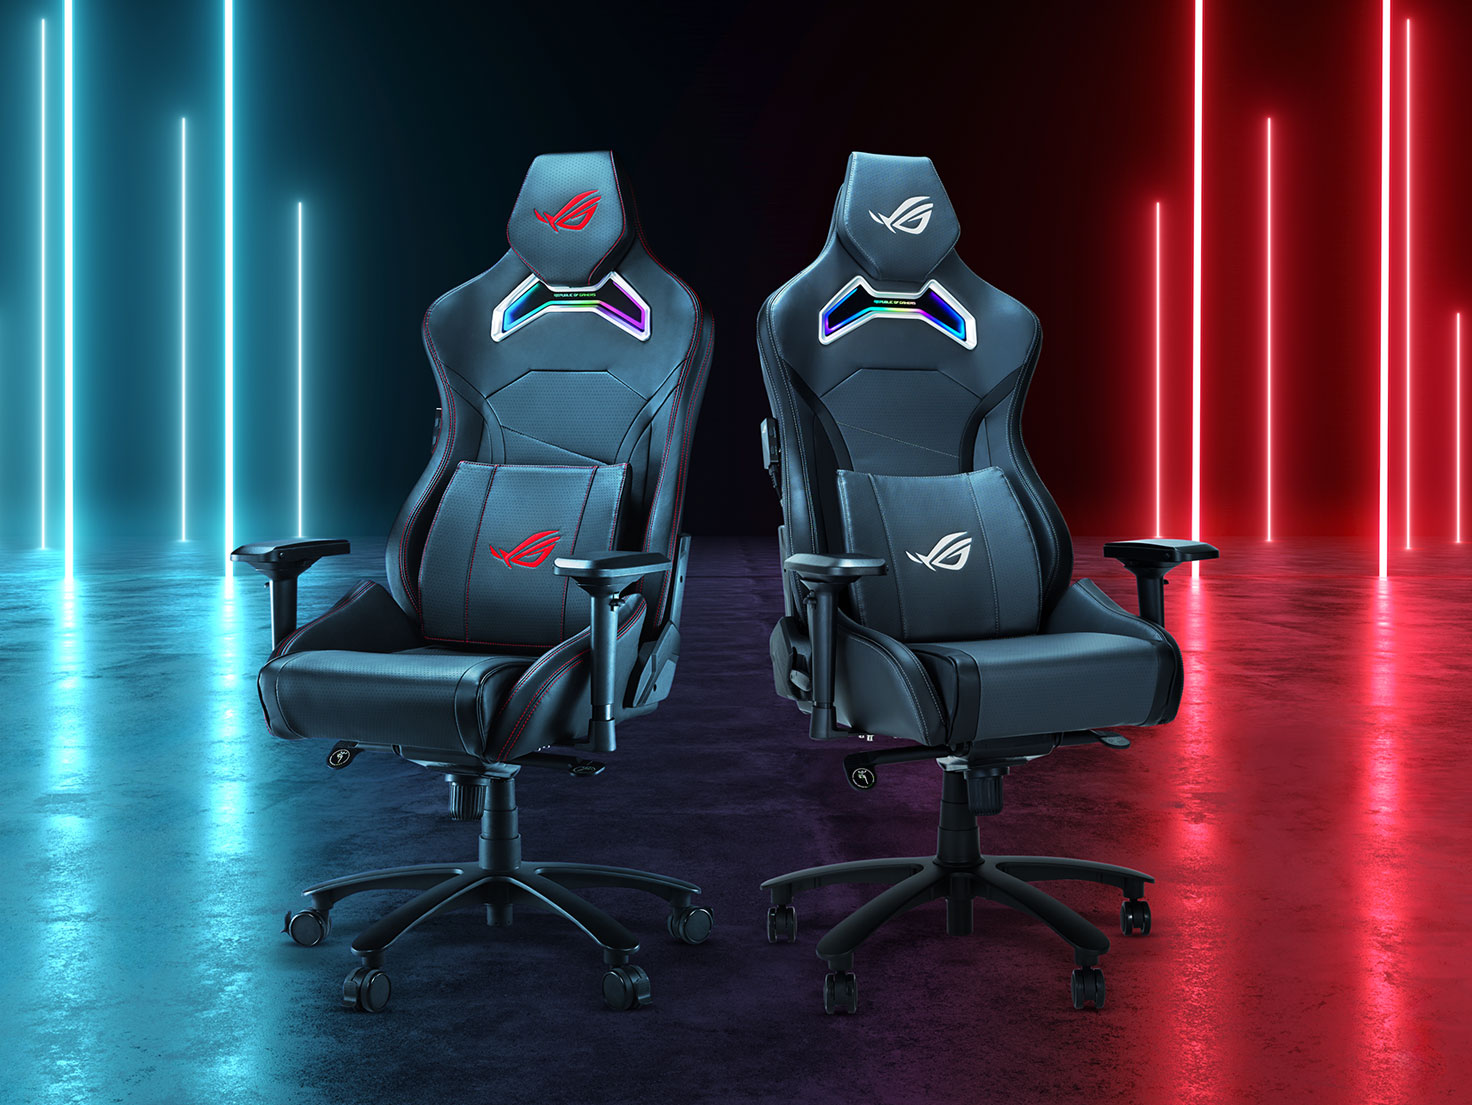 Two Chariot X gaming chair in black and grey variations side by side.